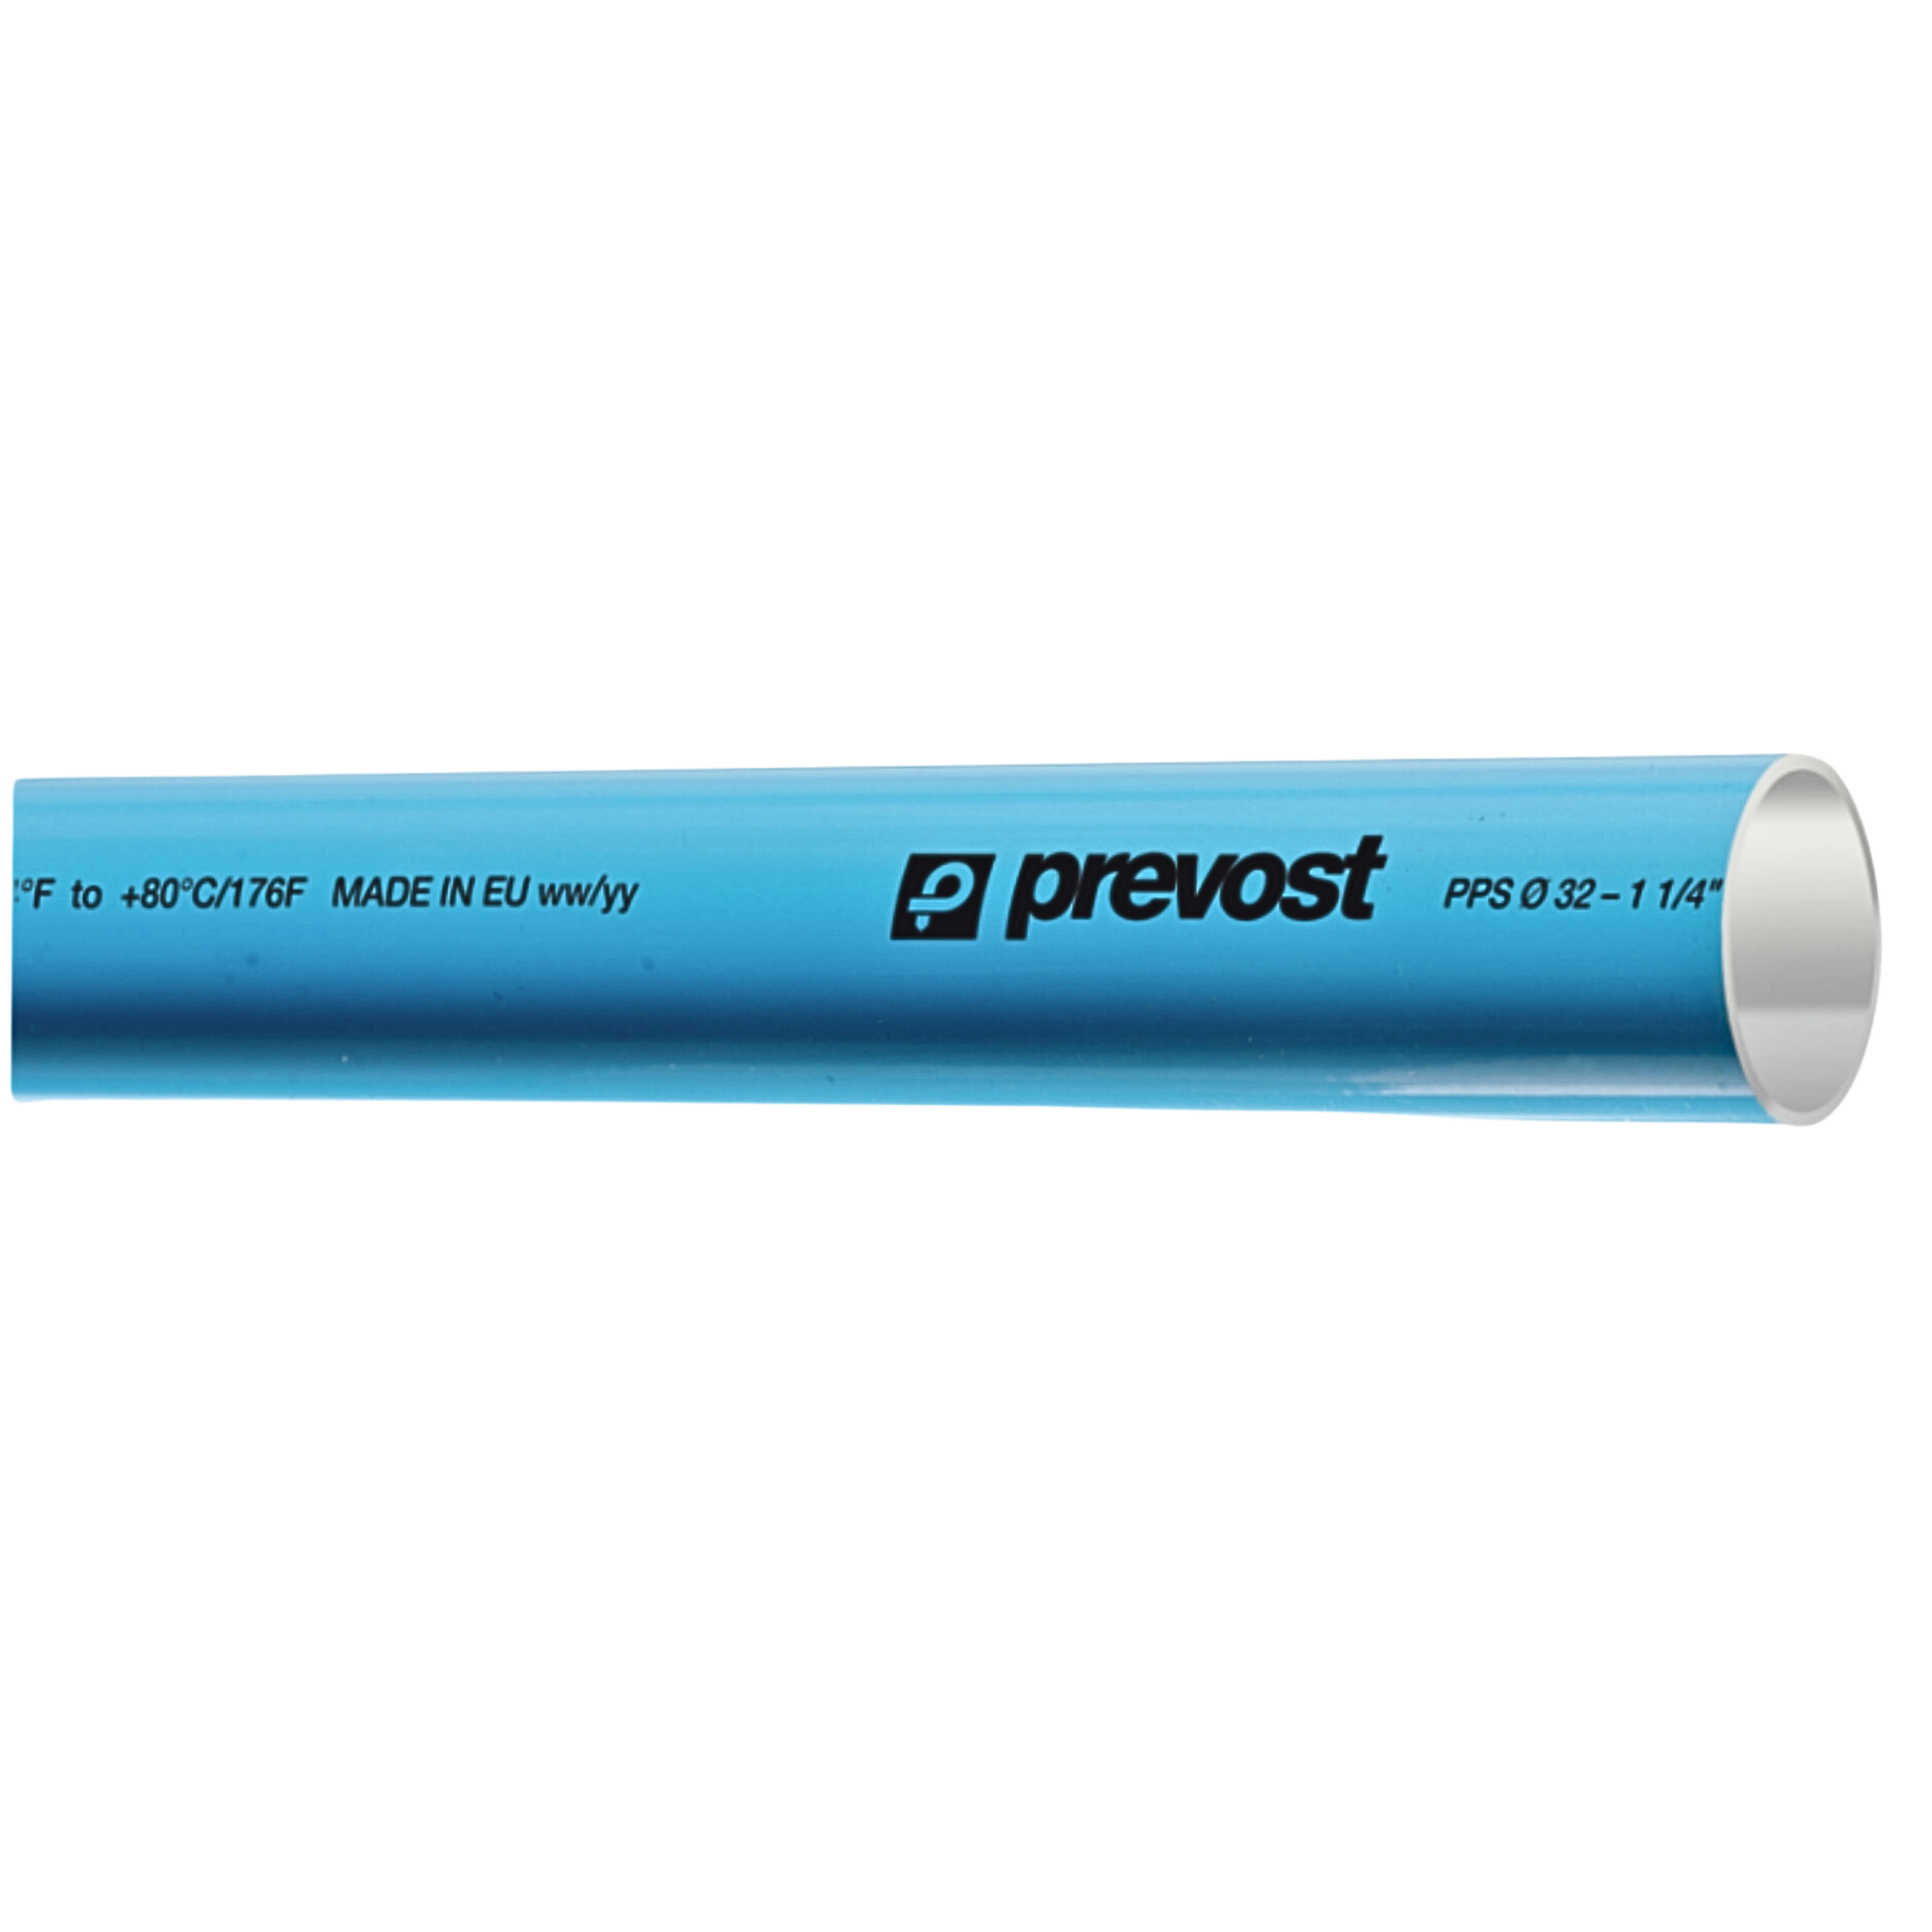 PPS - Aluminum 1/2" blue pipe for compressed air used on prevos1 product line